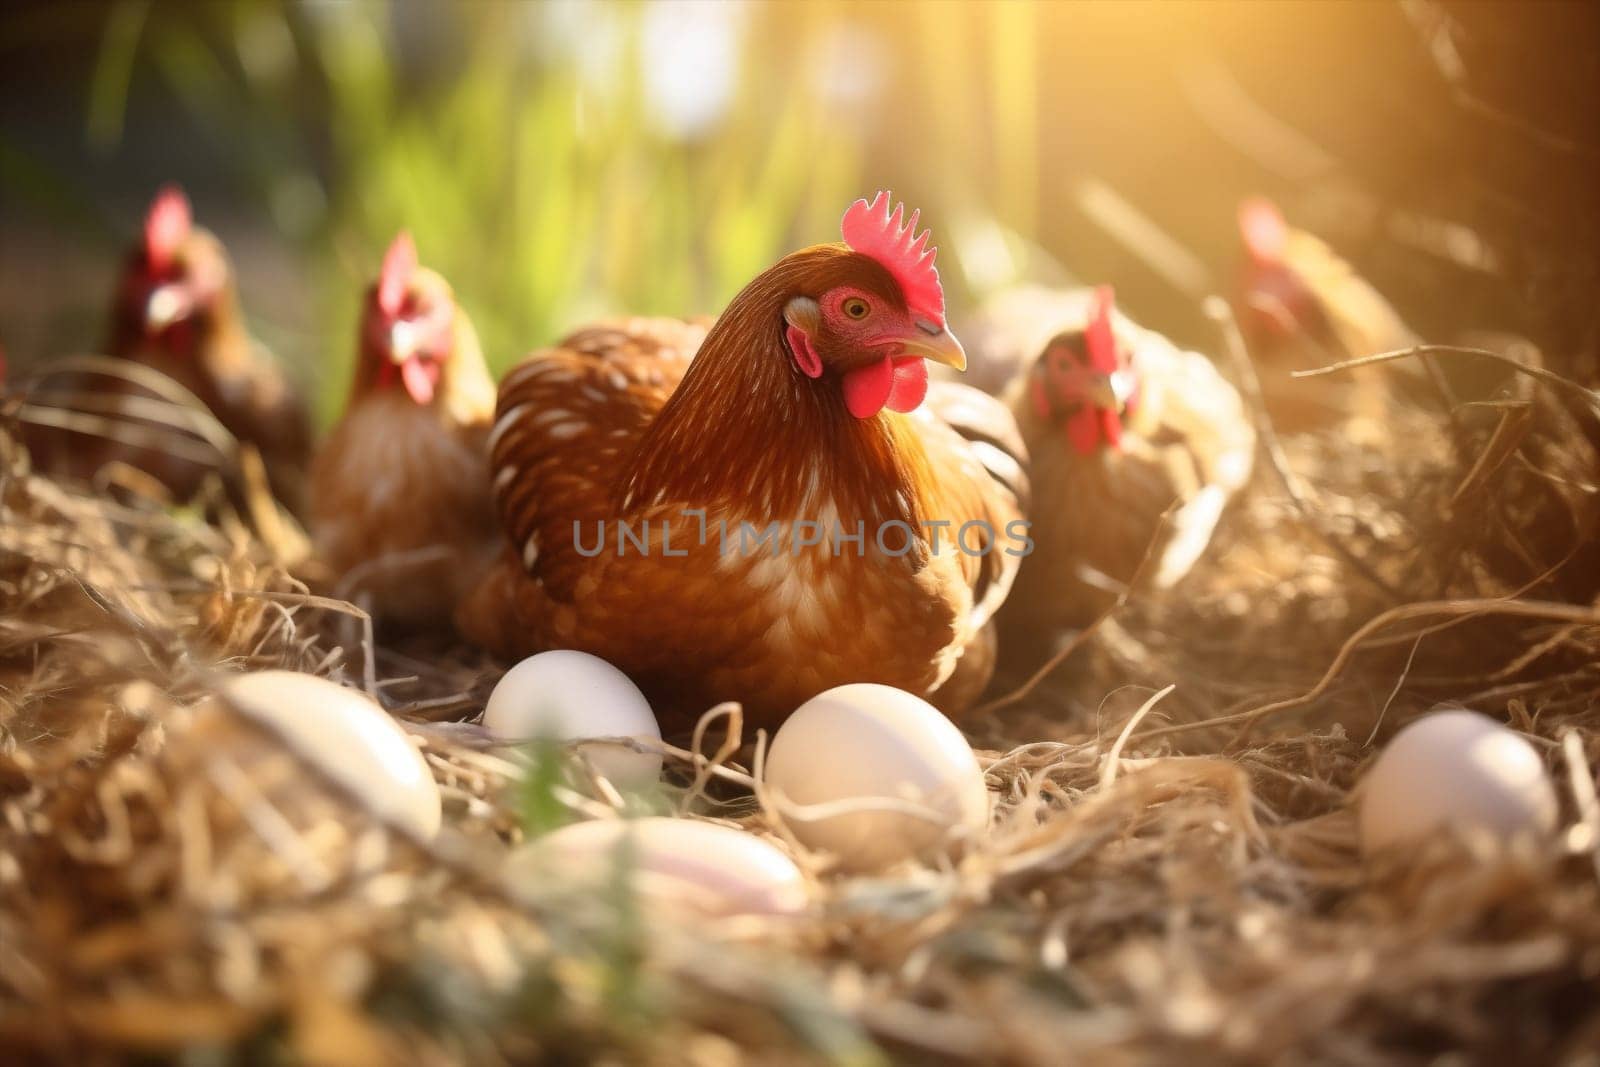 Agriculture chick grass rural poultry bird chicken organic farming brown egg nature healthy food beak feather fowl rooster hen domestic animal free